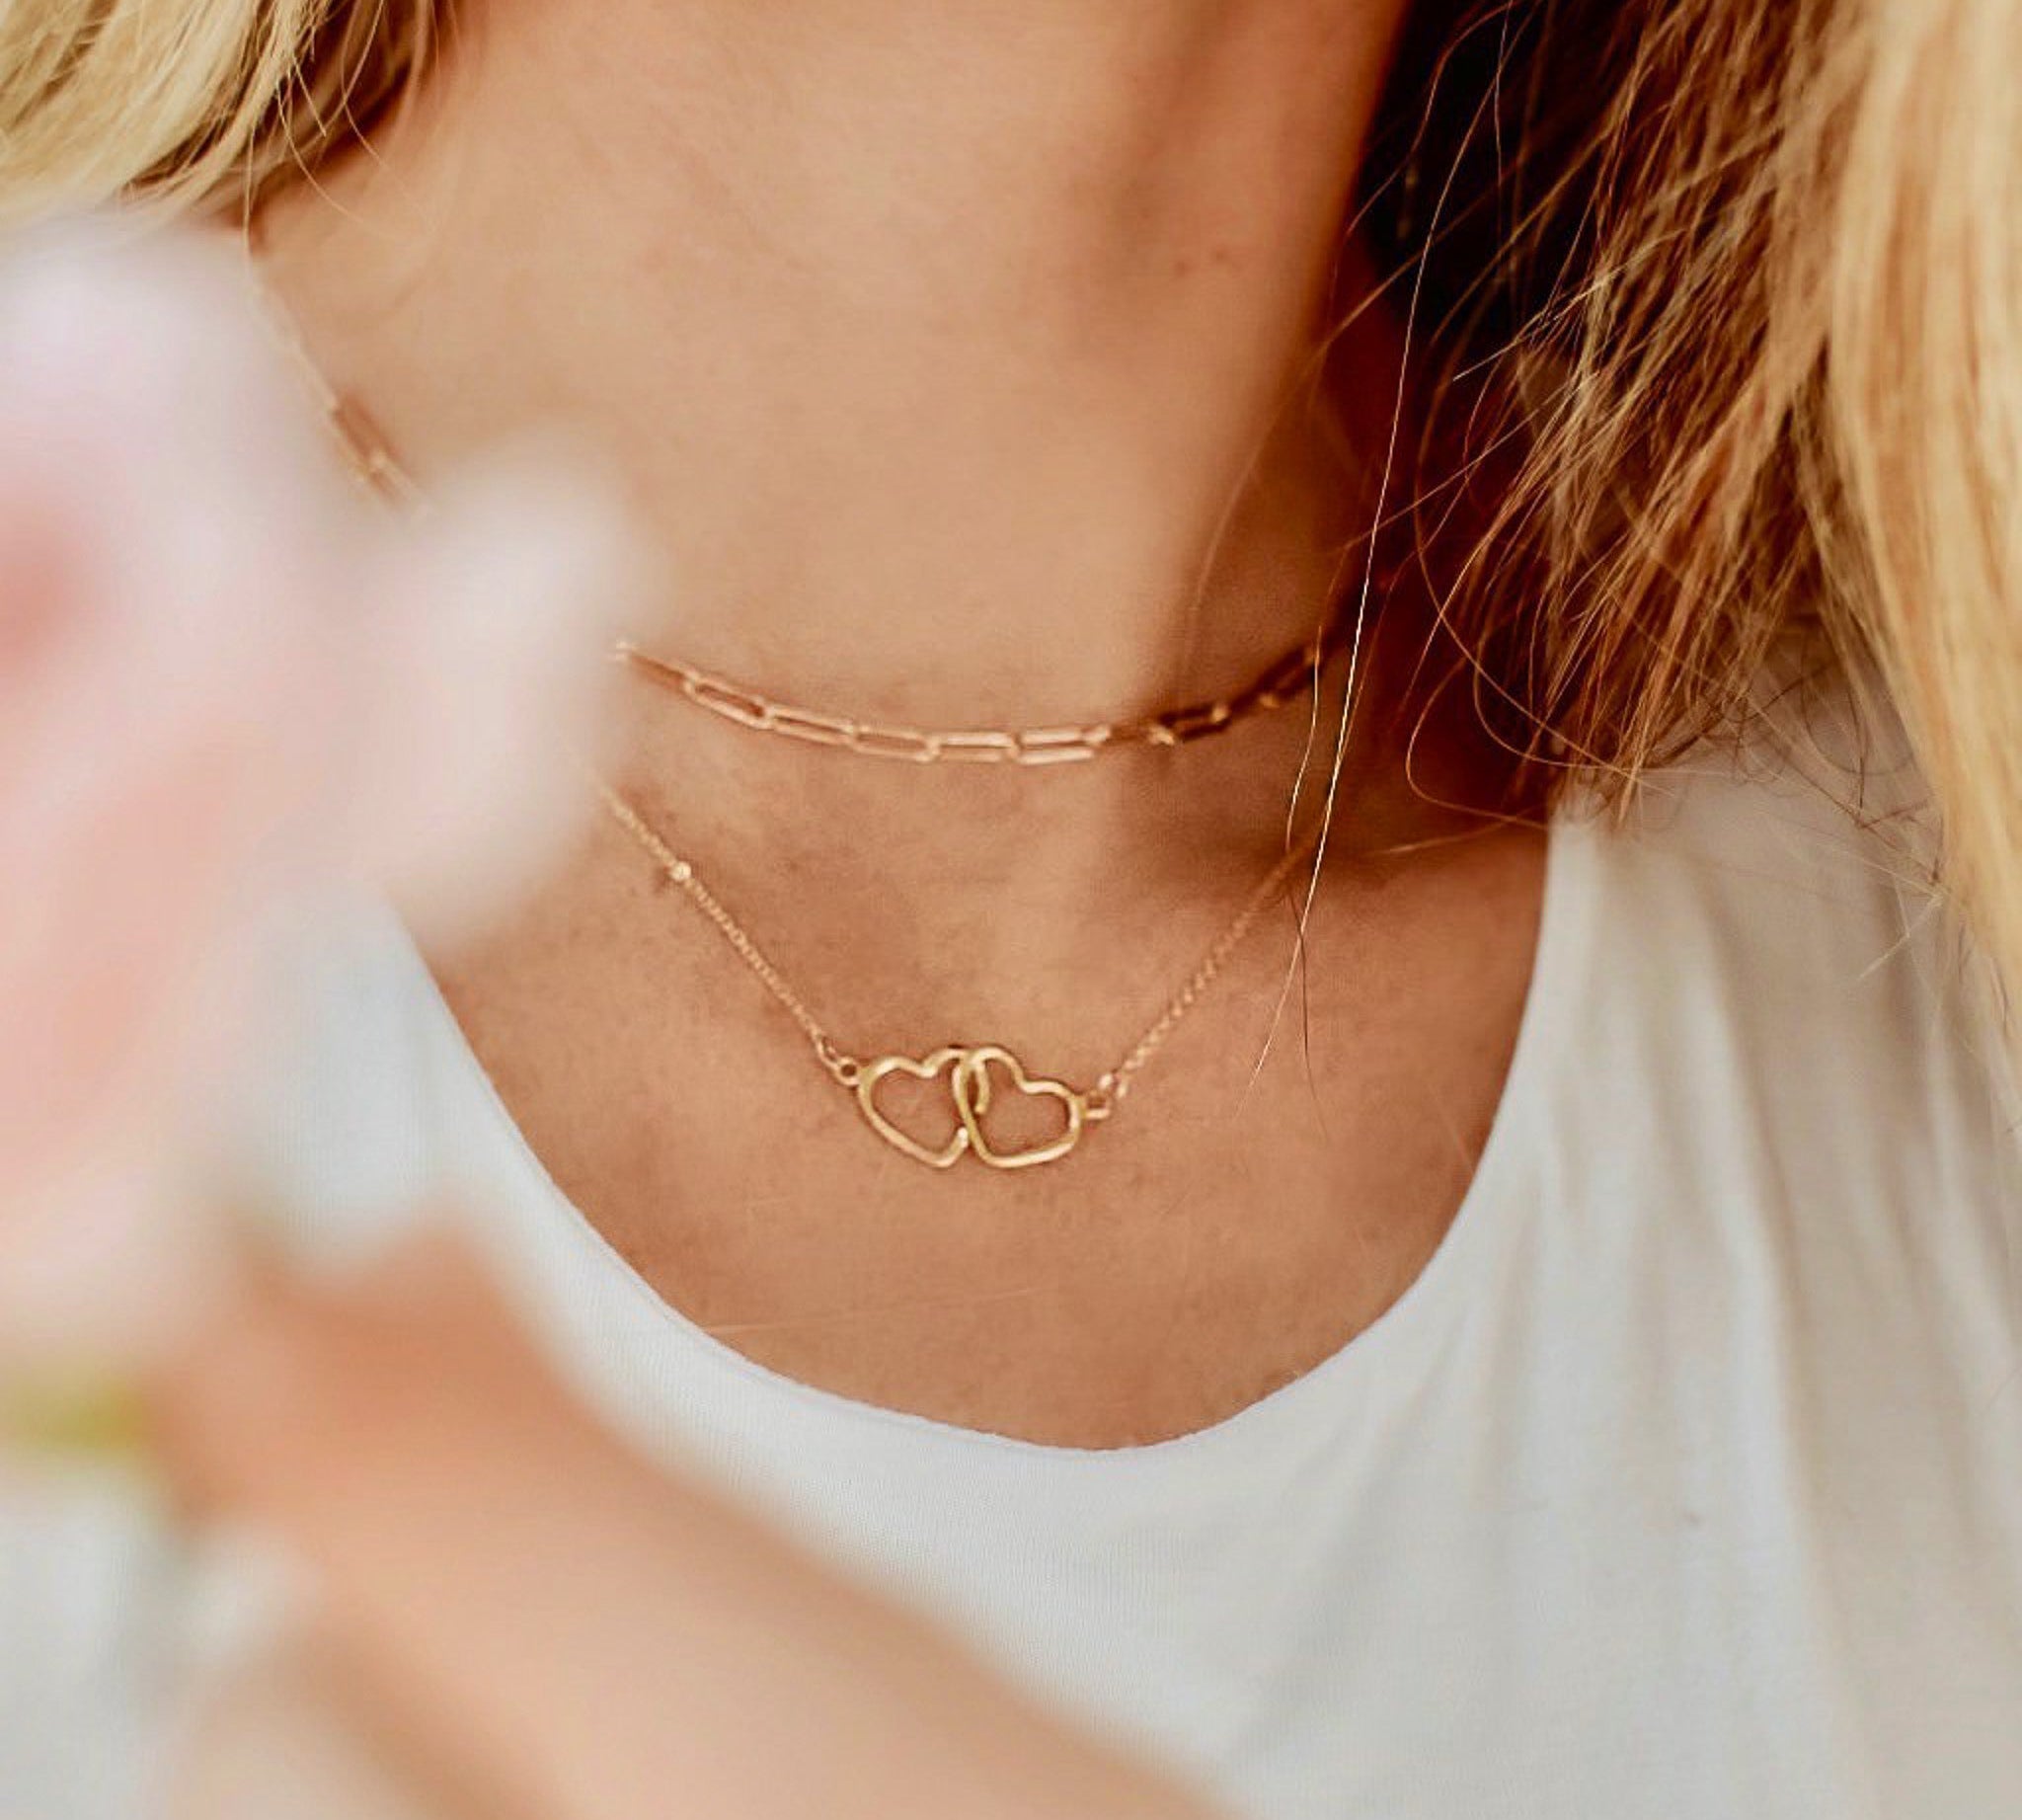 Gold Friendship and Charming Chain Necklaces, shown on model